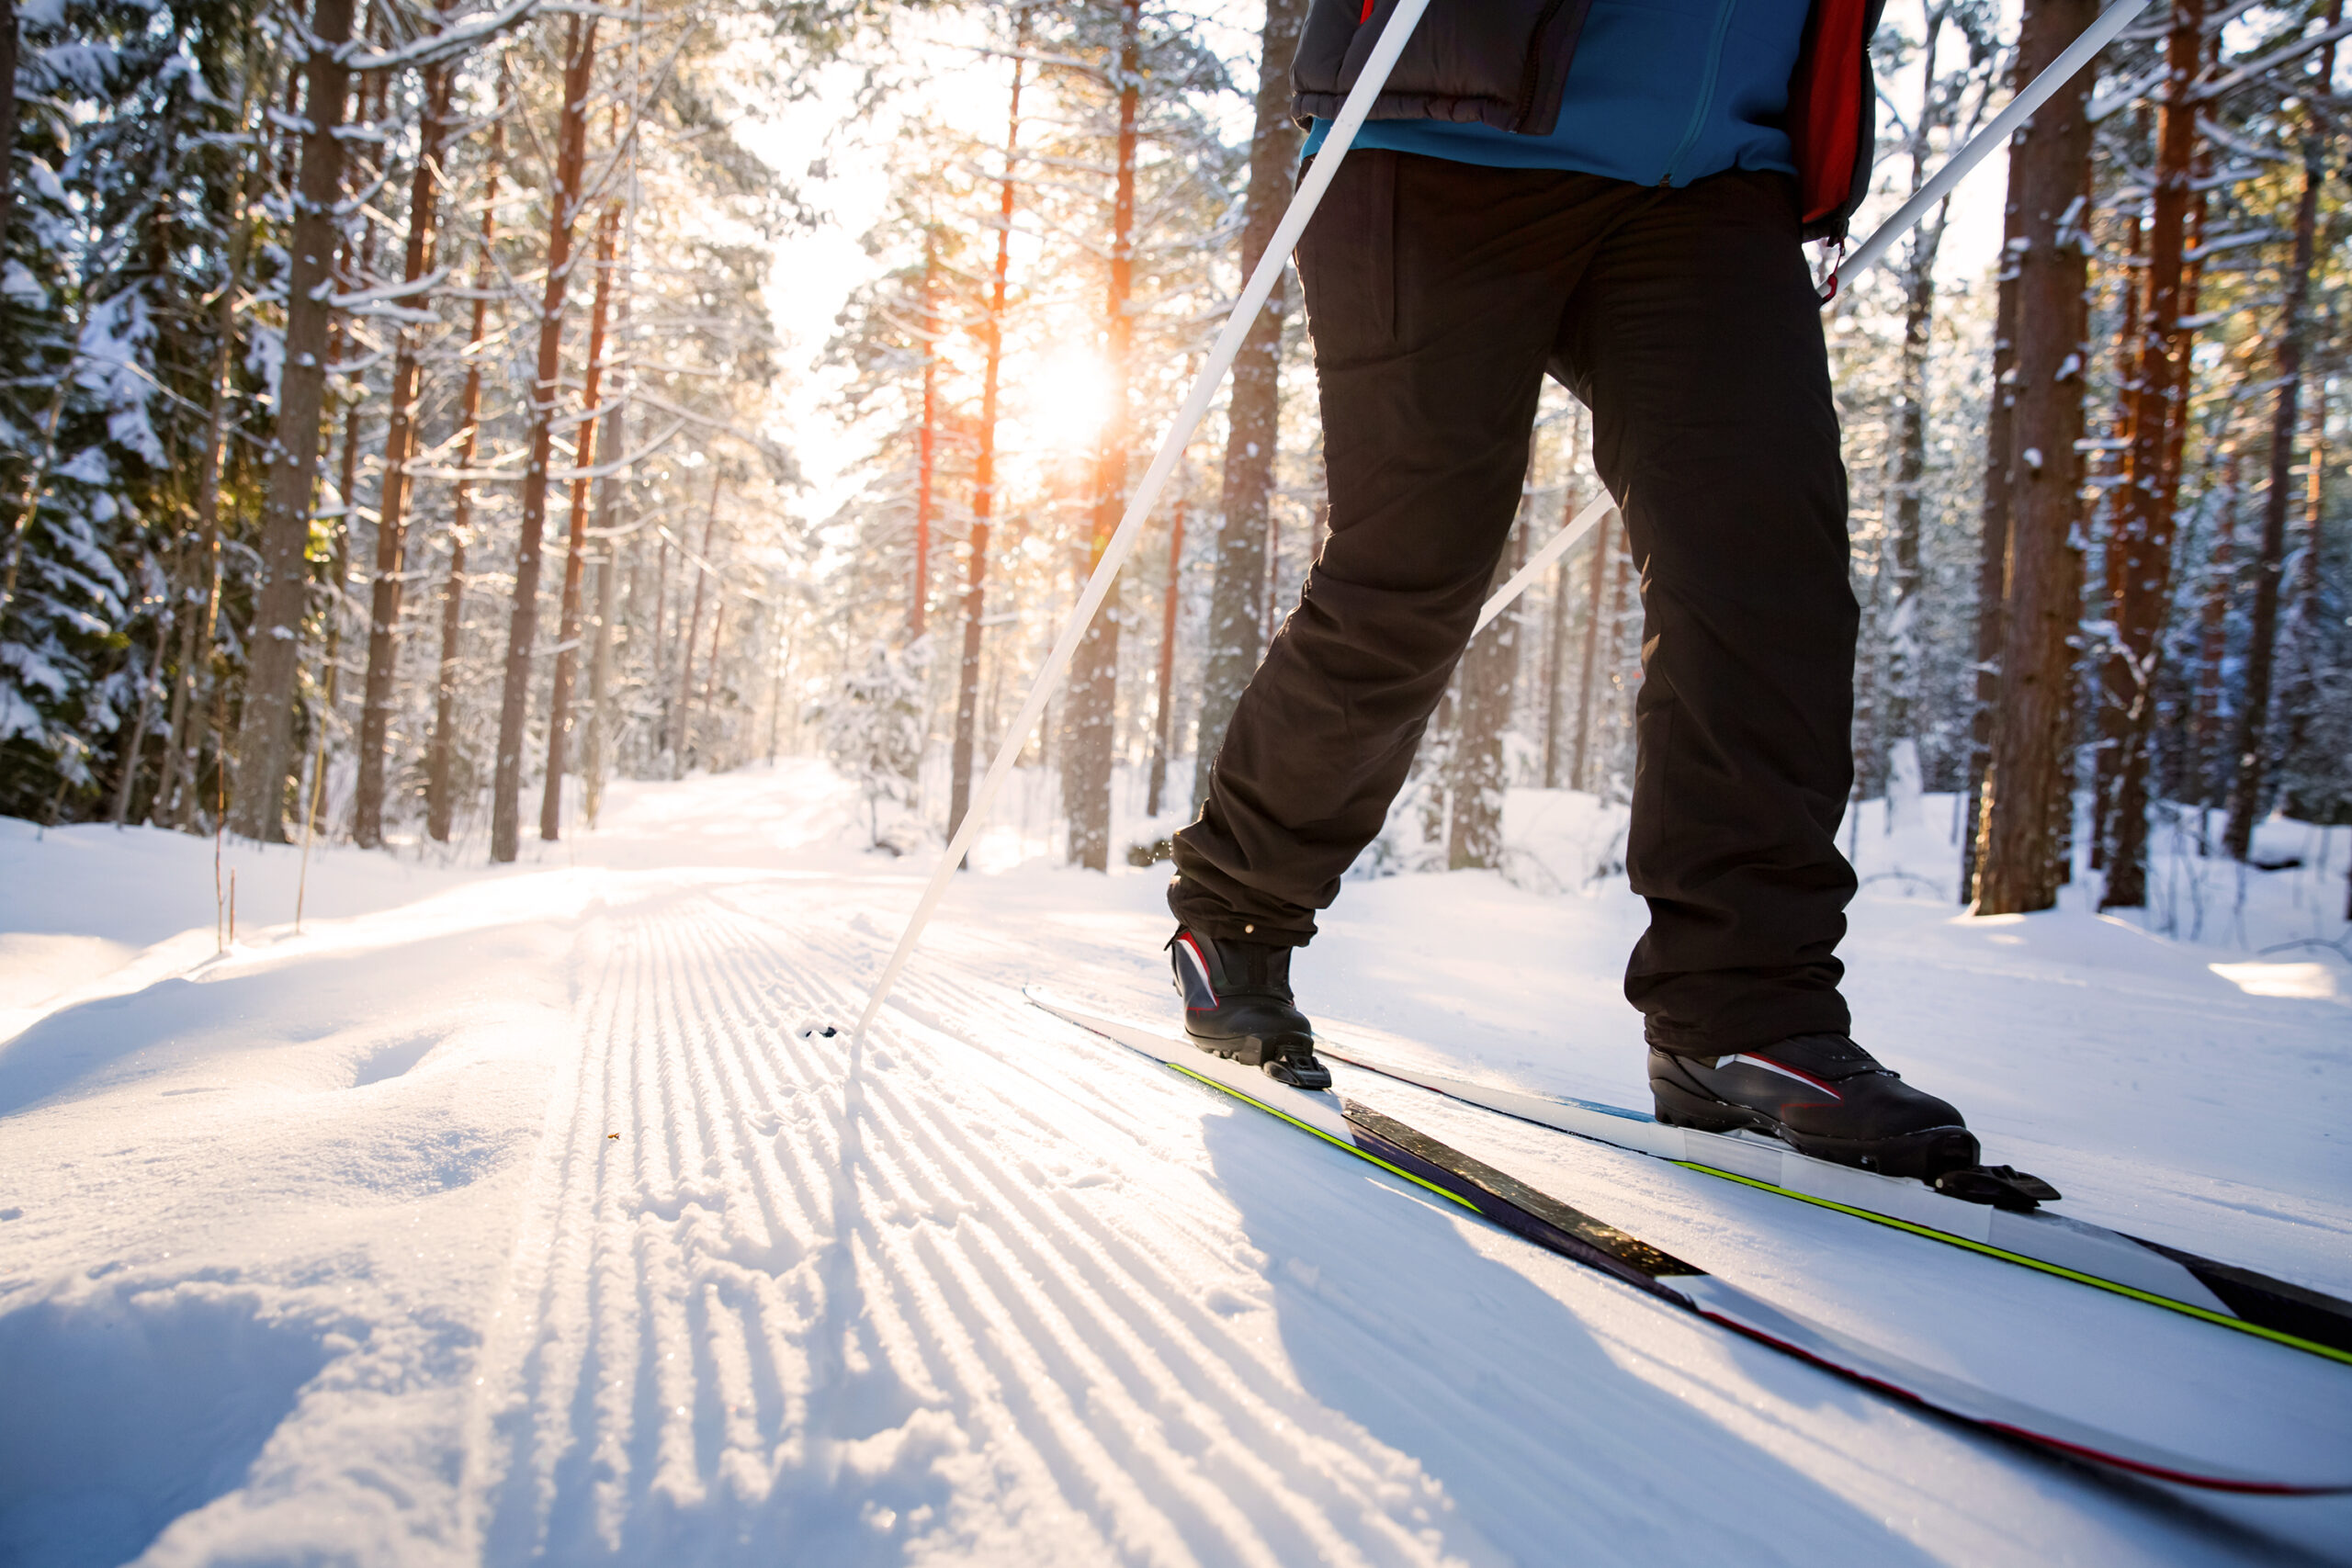 Close up shot of a person cross country skiing in the winter with sun setting in the background